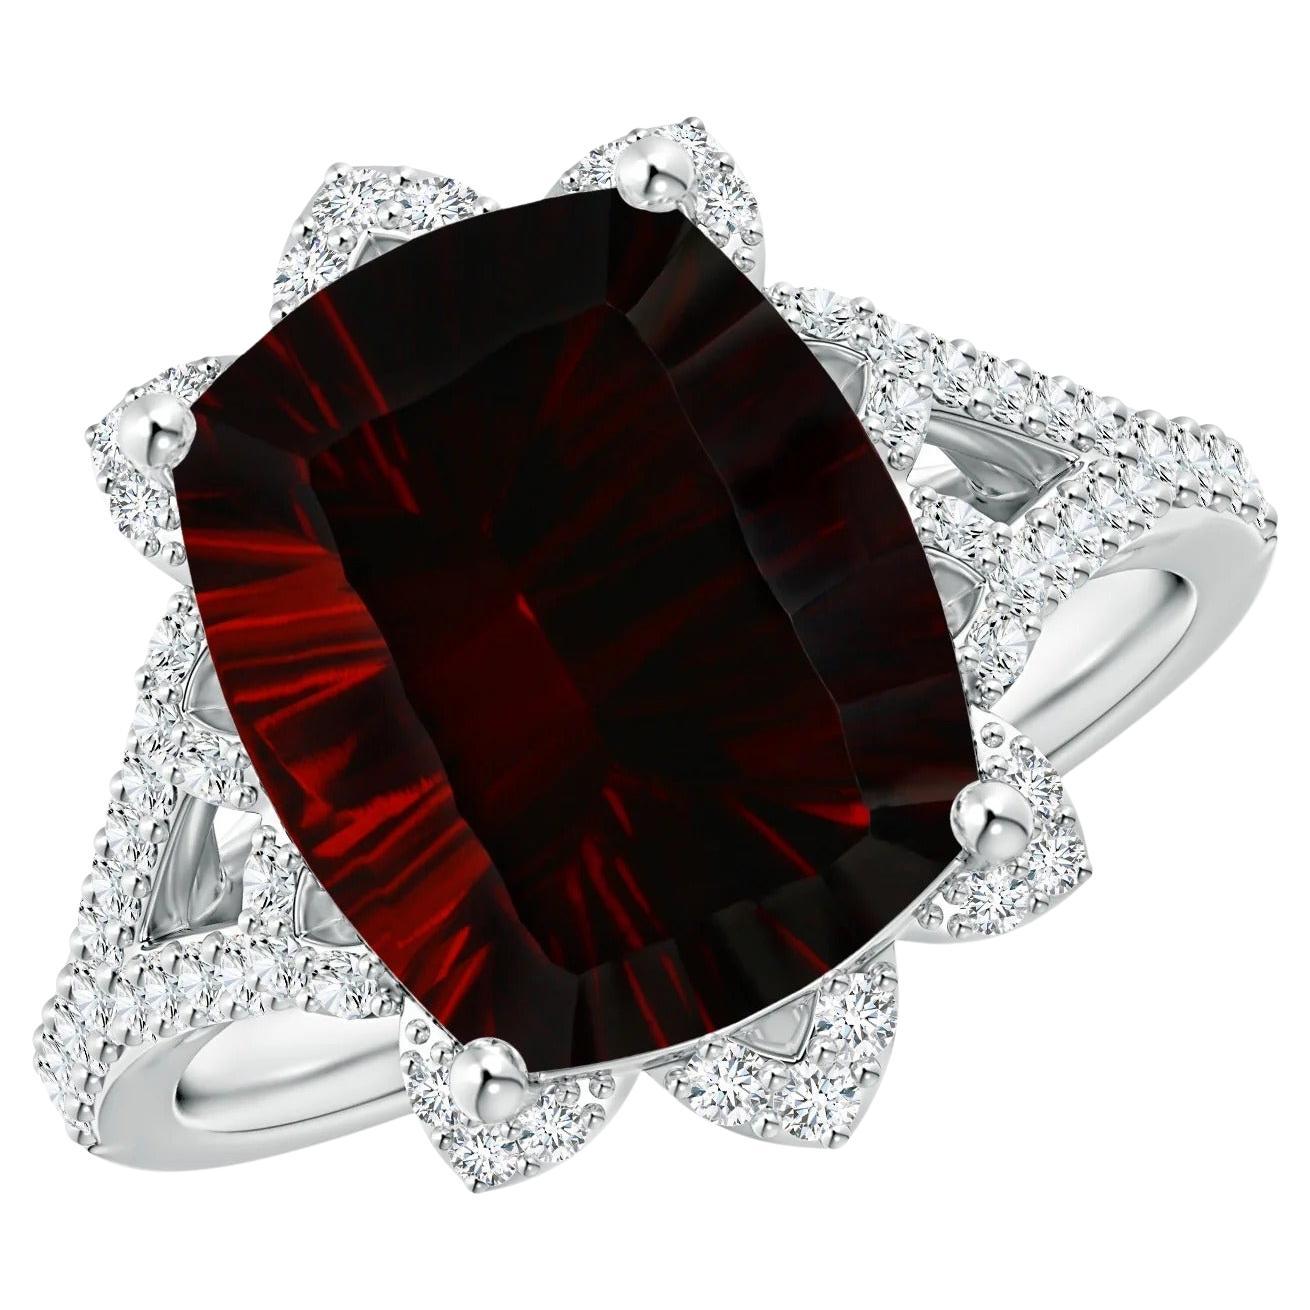 For Sale:  Vintage Style GIA Certified Natural Garnet Floral Halo Ring in Platinum